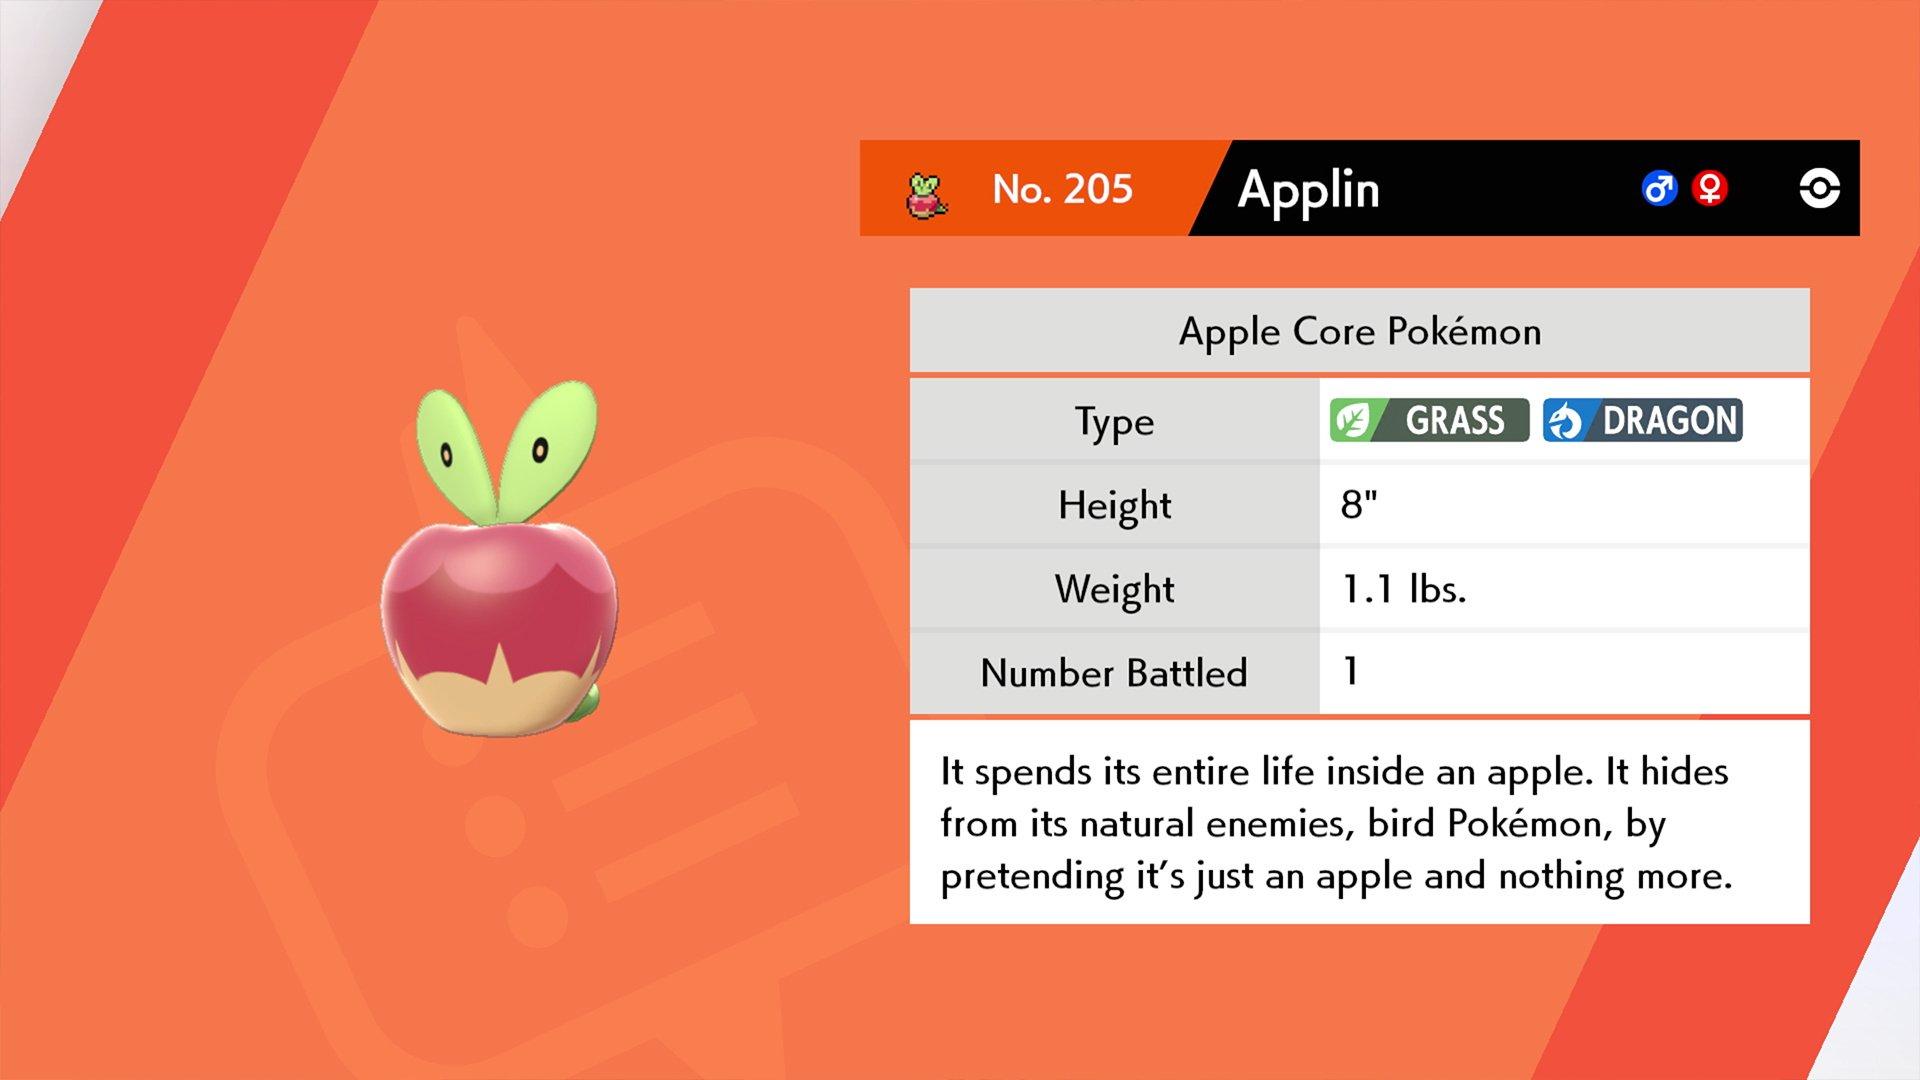 Pokémon Sword And Shield's Applin: How To Find And Evolve